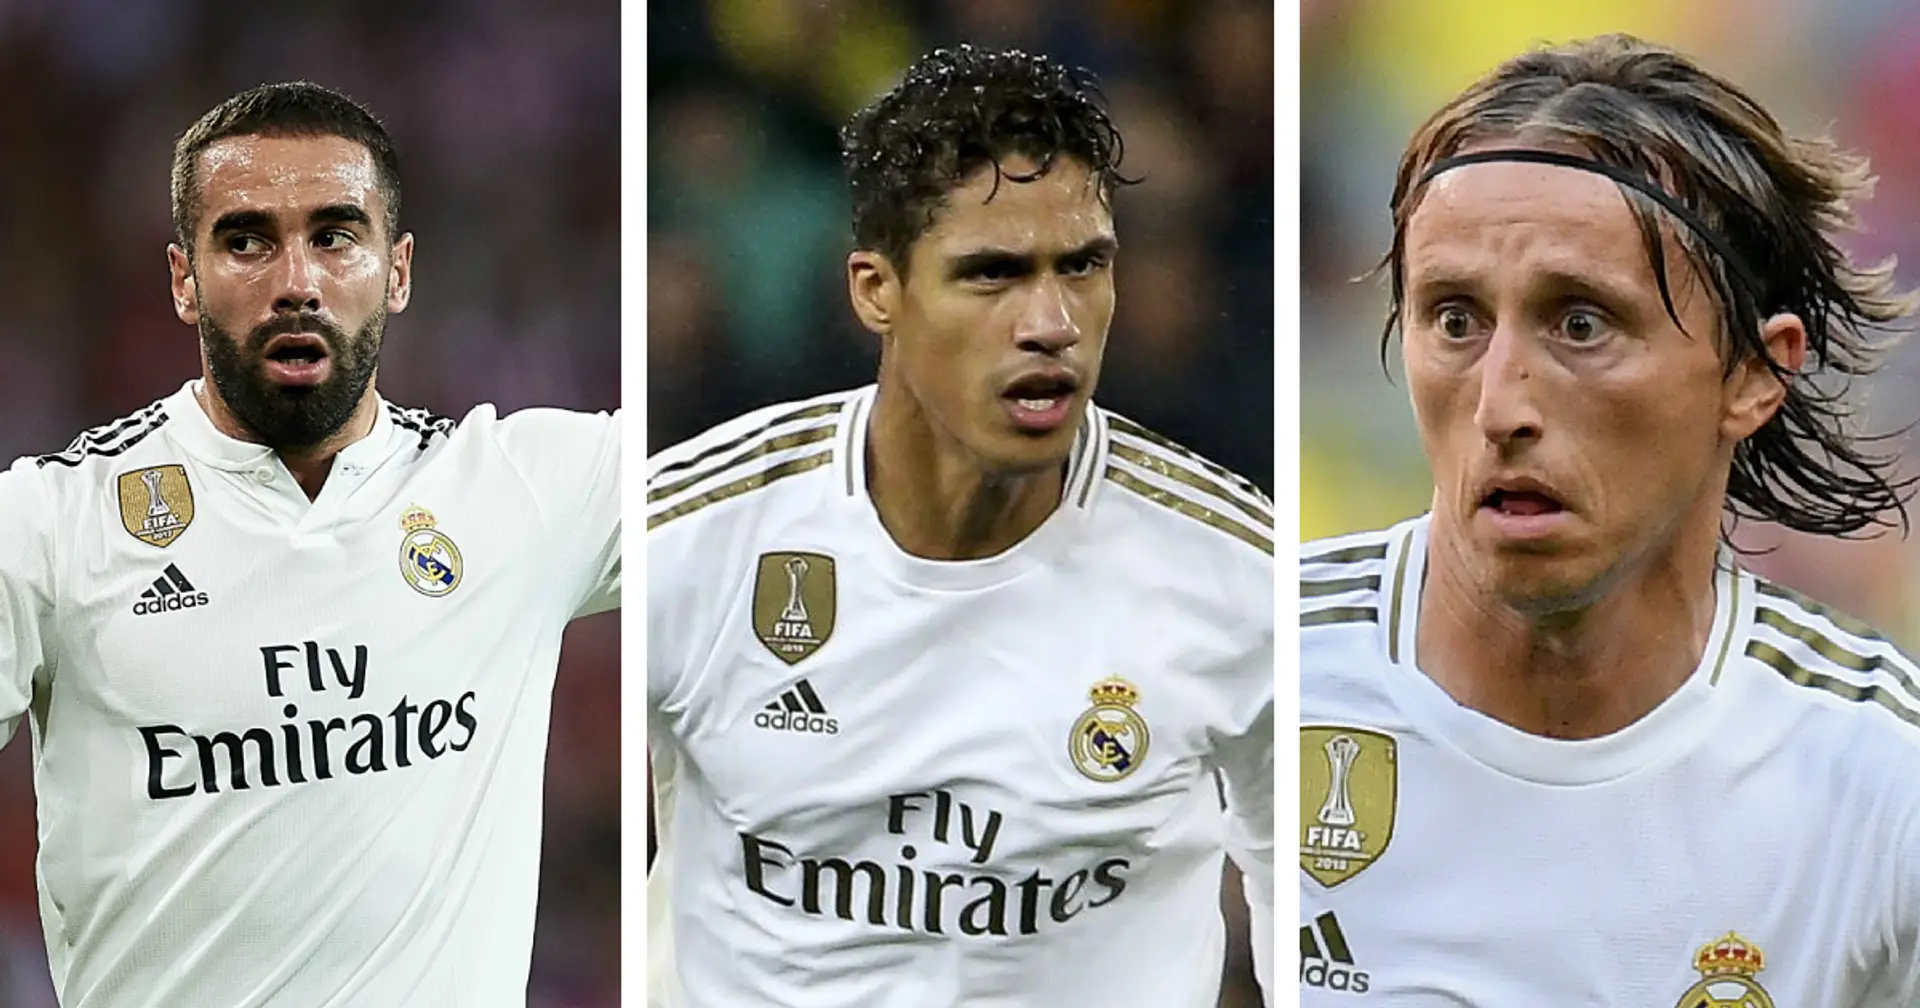 Varane, Carvajal and 8 more players whose contracts expire in less than 24 months